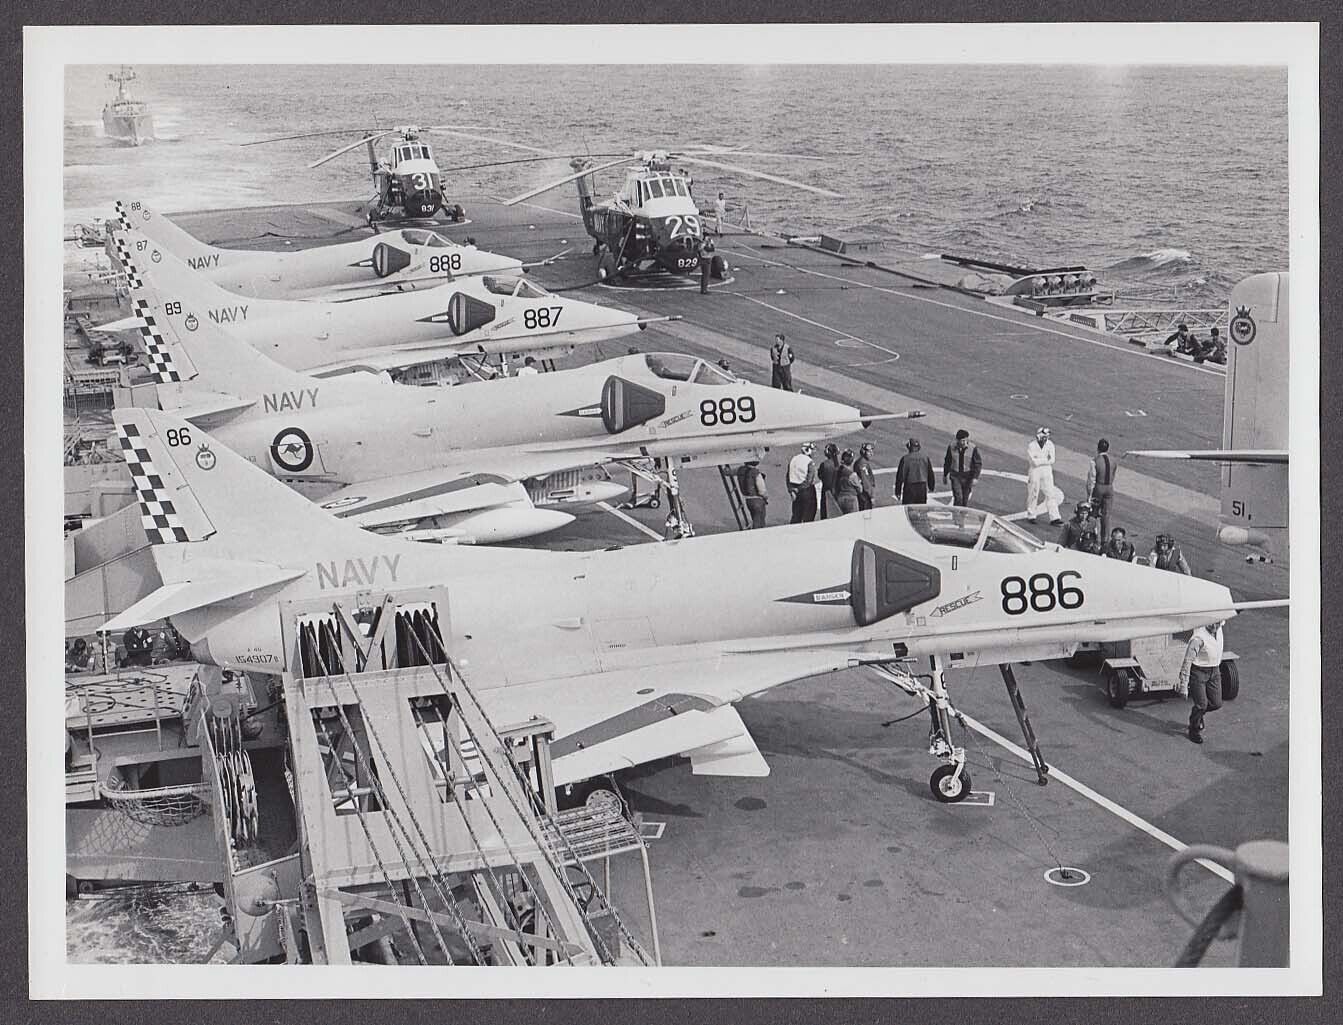 Royal Australian Navy A-4G Skyhawk jets Wessex helicopters on carrier photo 1970